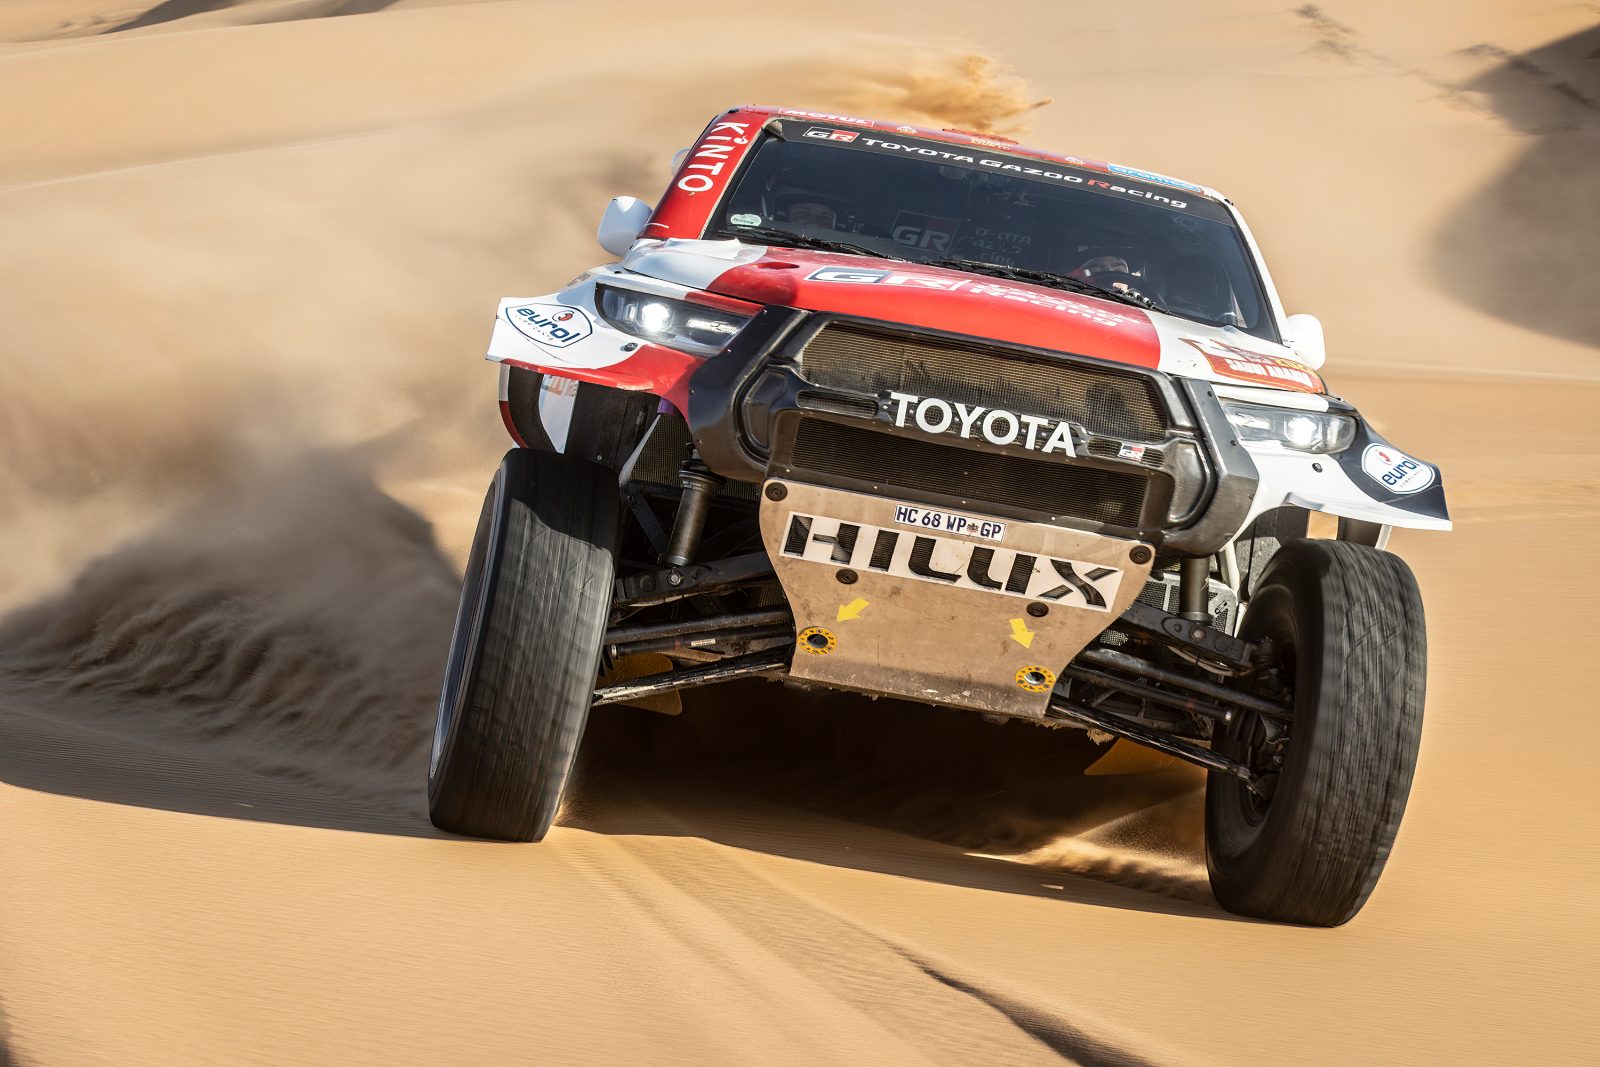 The Very Best Action from Dakar 2023 